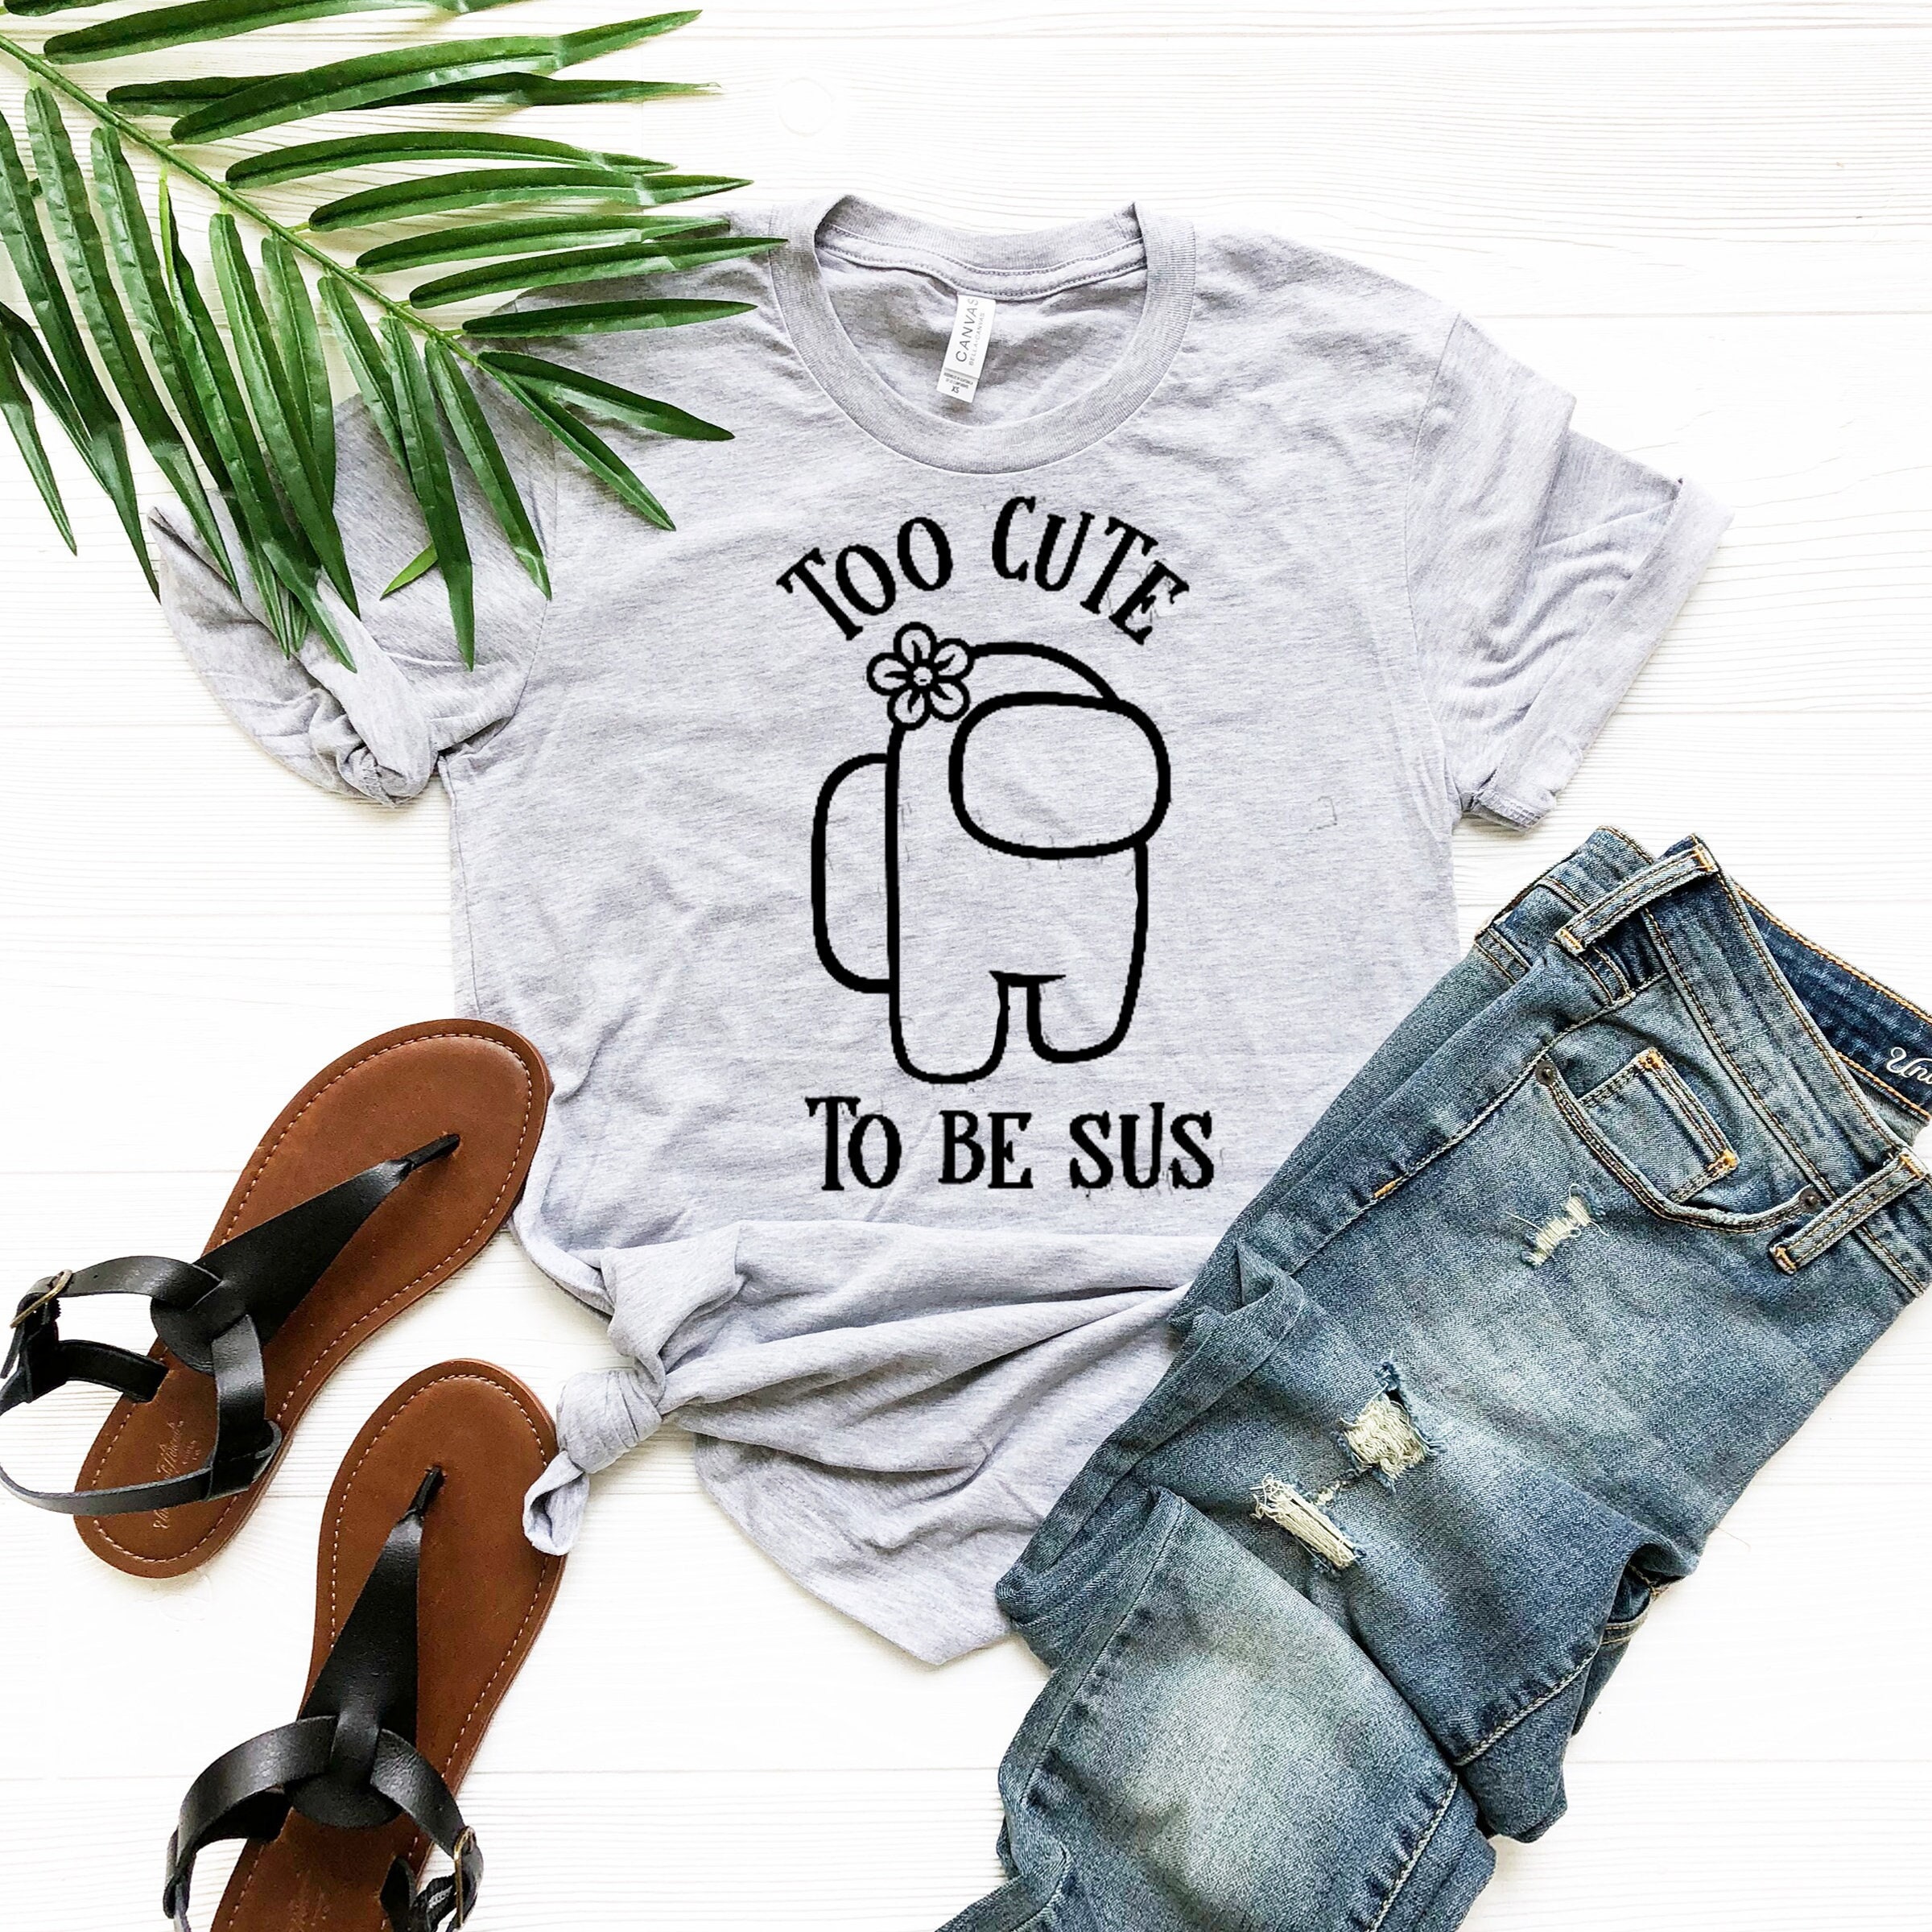 Too Sussy For School Imposter Among Us Unisex T-Shirt - Teeruto